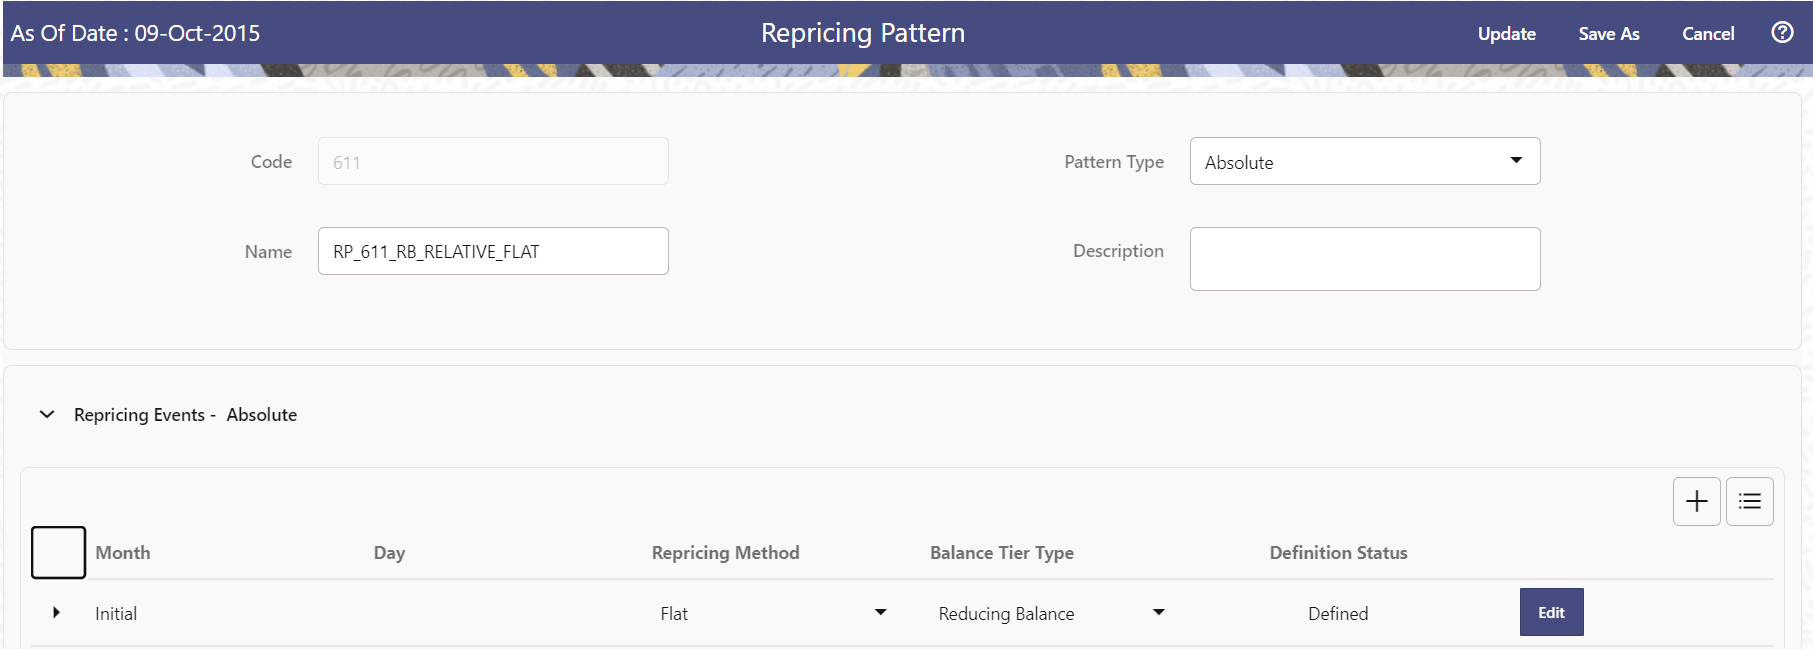 Define Absolute Repricing Pattern